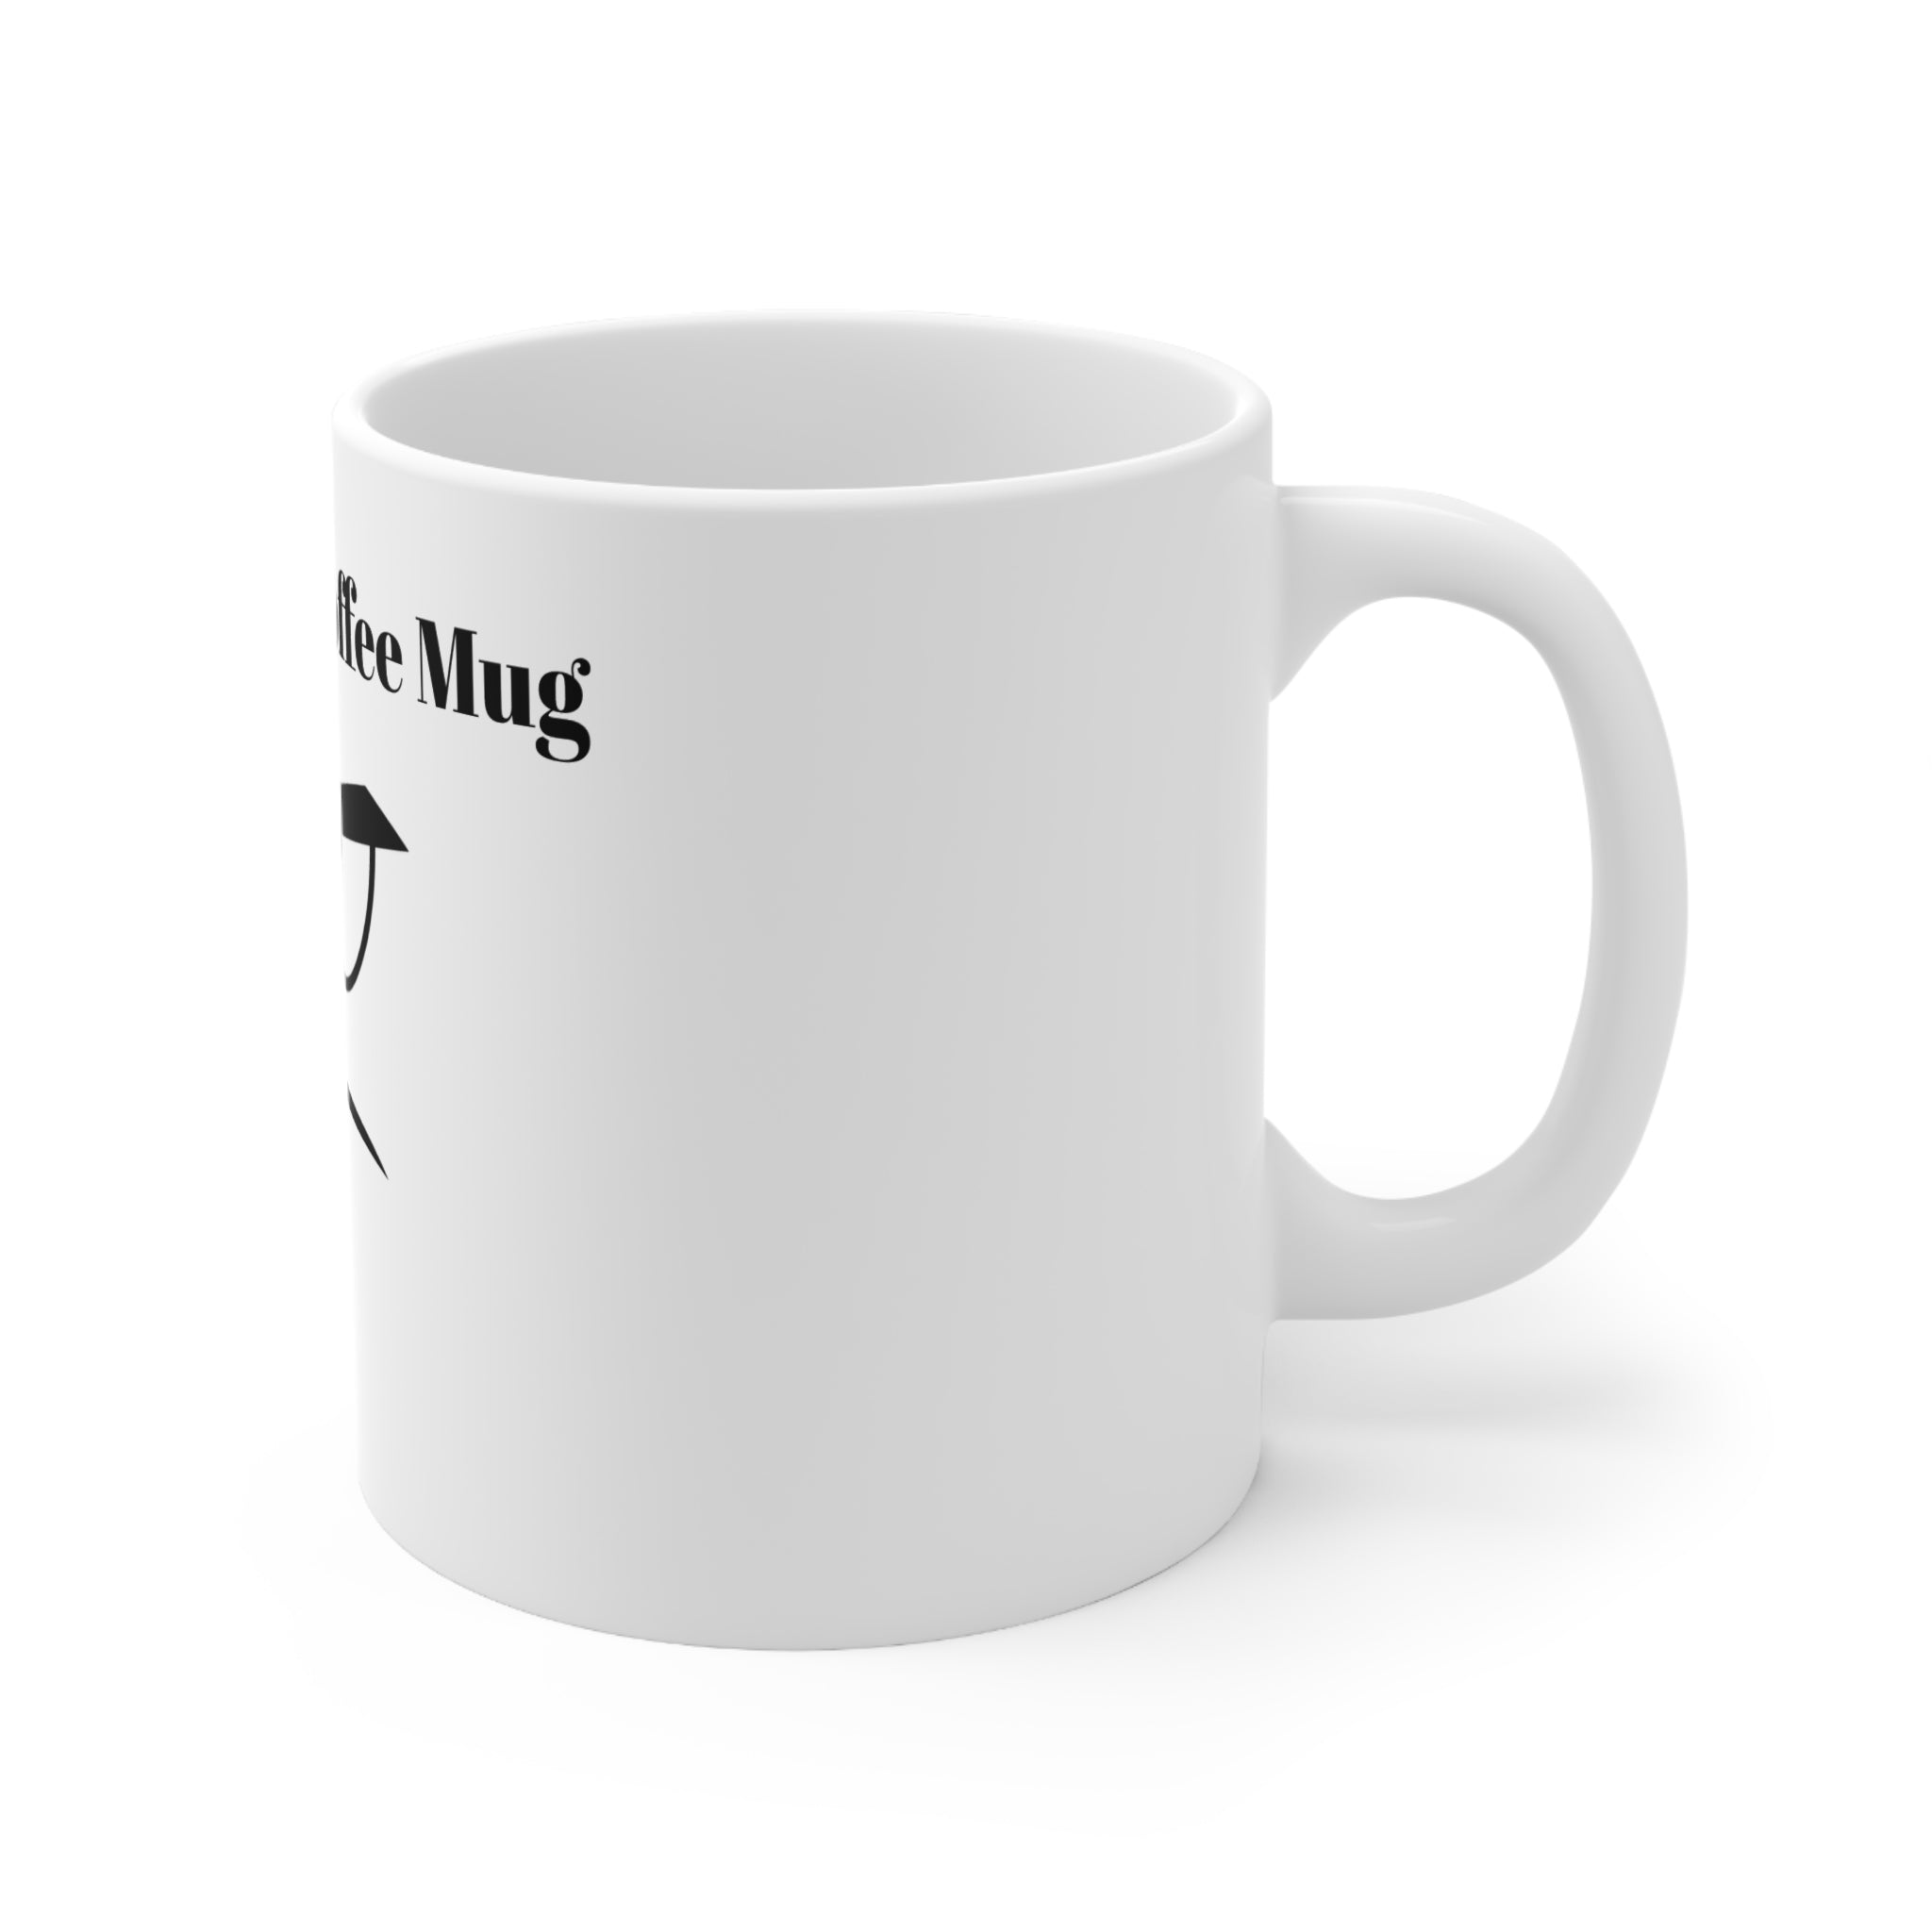 Boss's Coffee Mug 11oz Personalized Hilarious Office Gag Gift Funny Cup